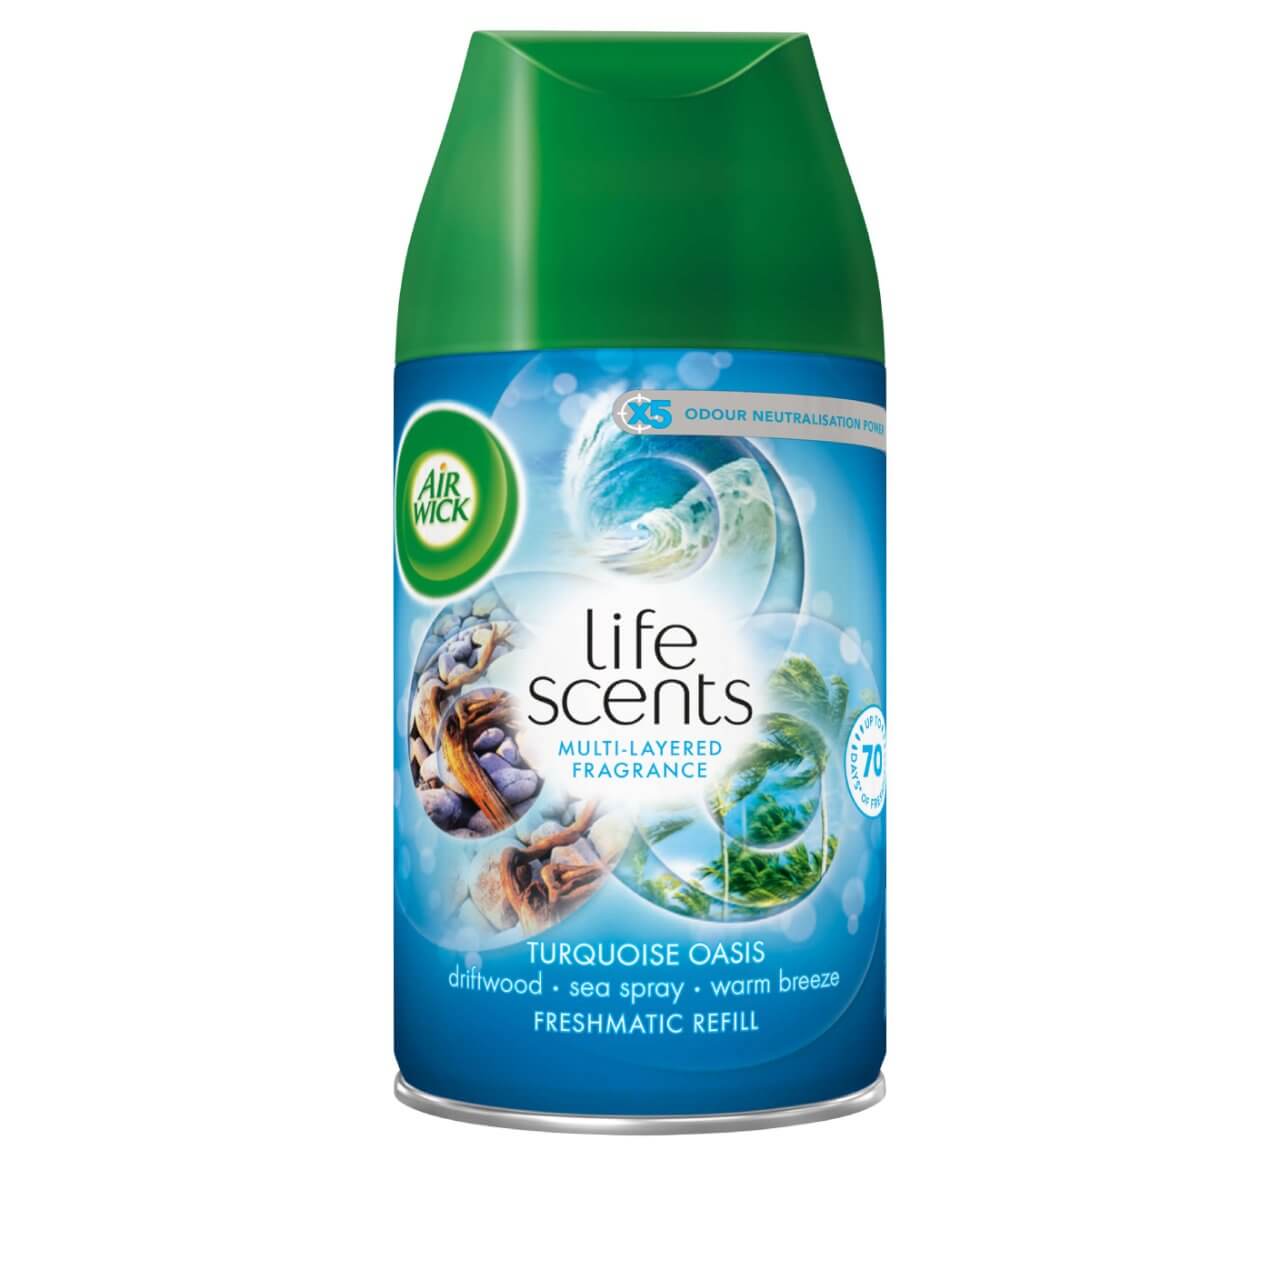 Air Wick Freshmatic Refill Life Scents Turquoise Oasis